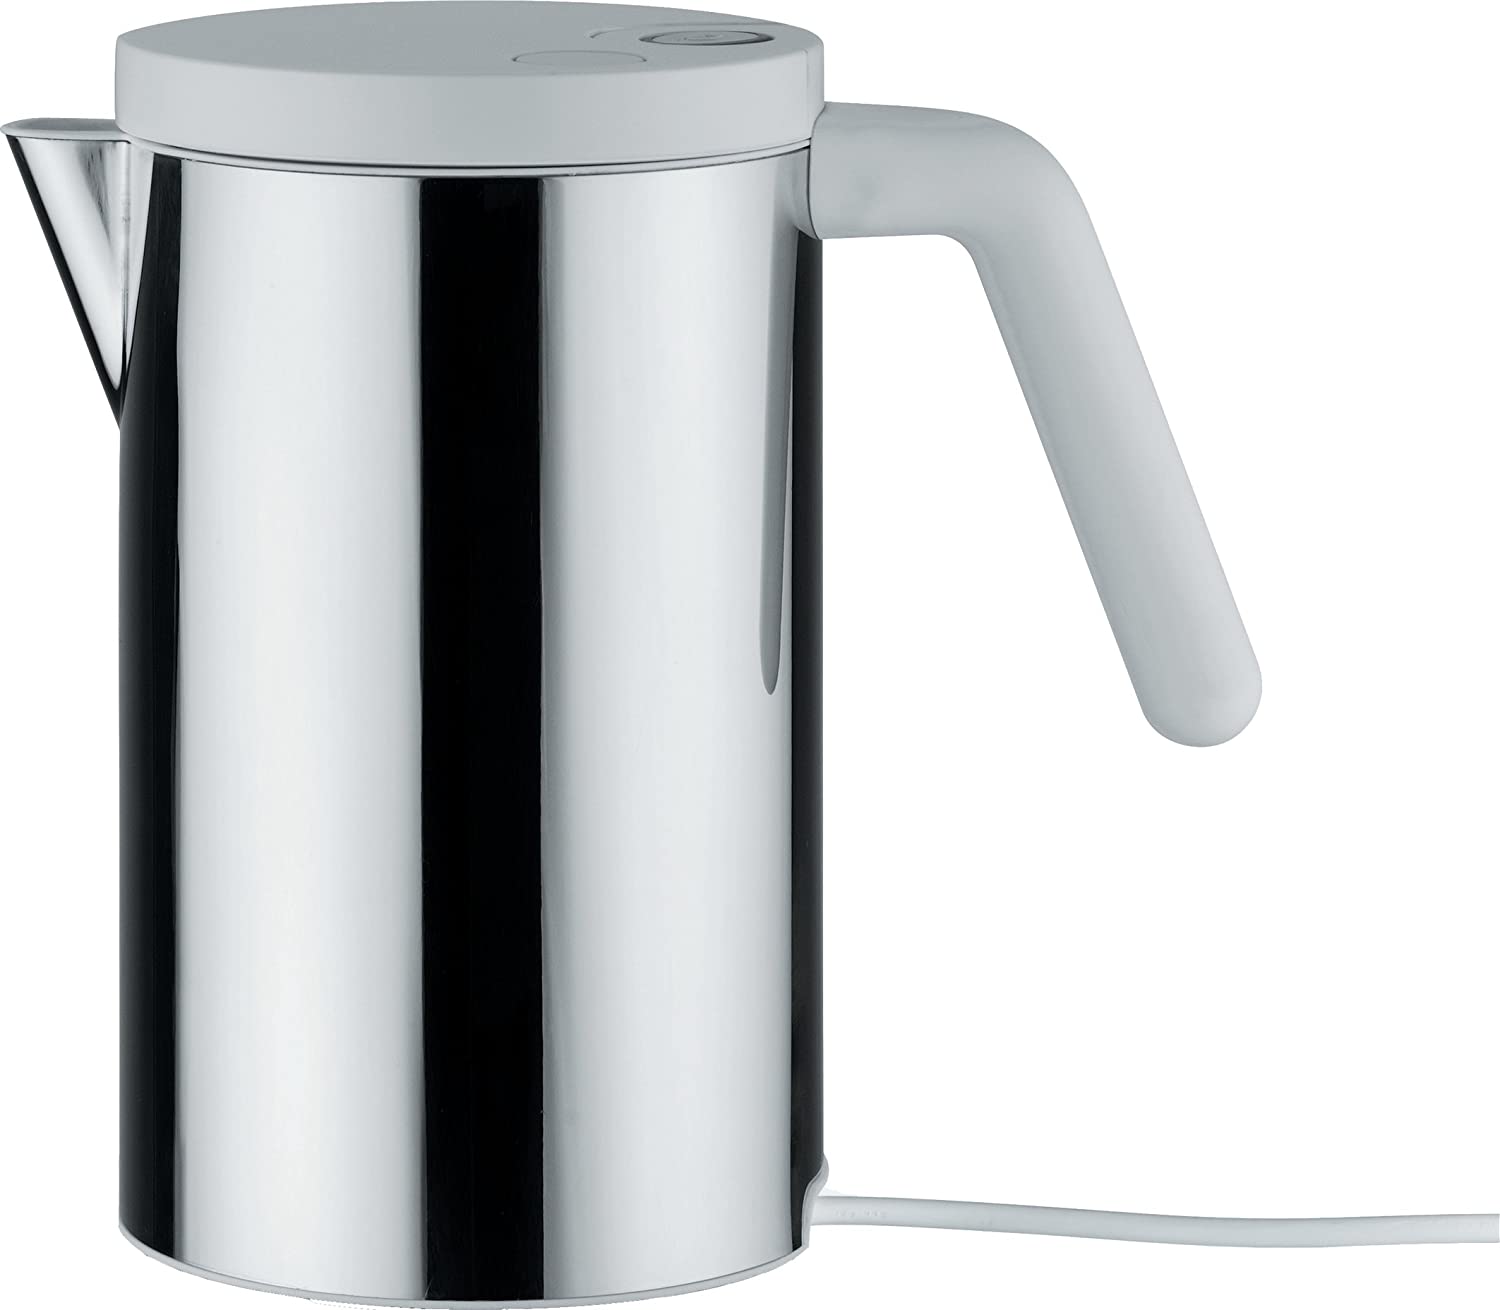 Alessi WA09/80WUK Hot. It Electric Water Boiler – Stainless Steel 18/10 POLISHED. English Stud Inside, Thermoplastic Resin Handle and Lid ASU – White.